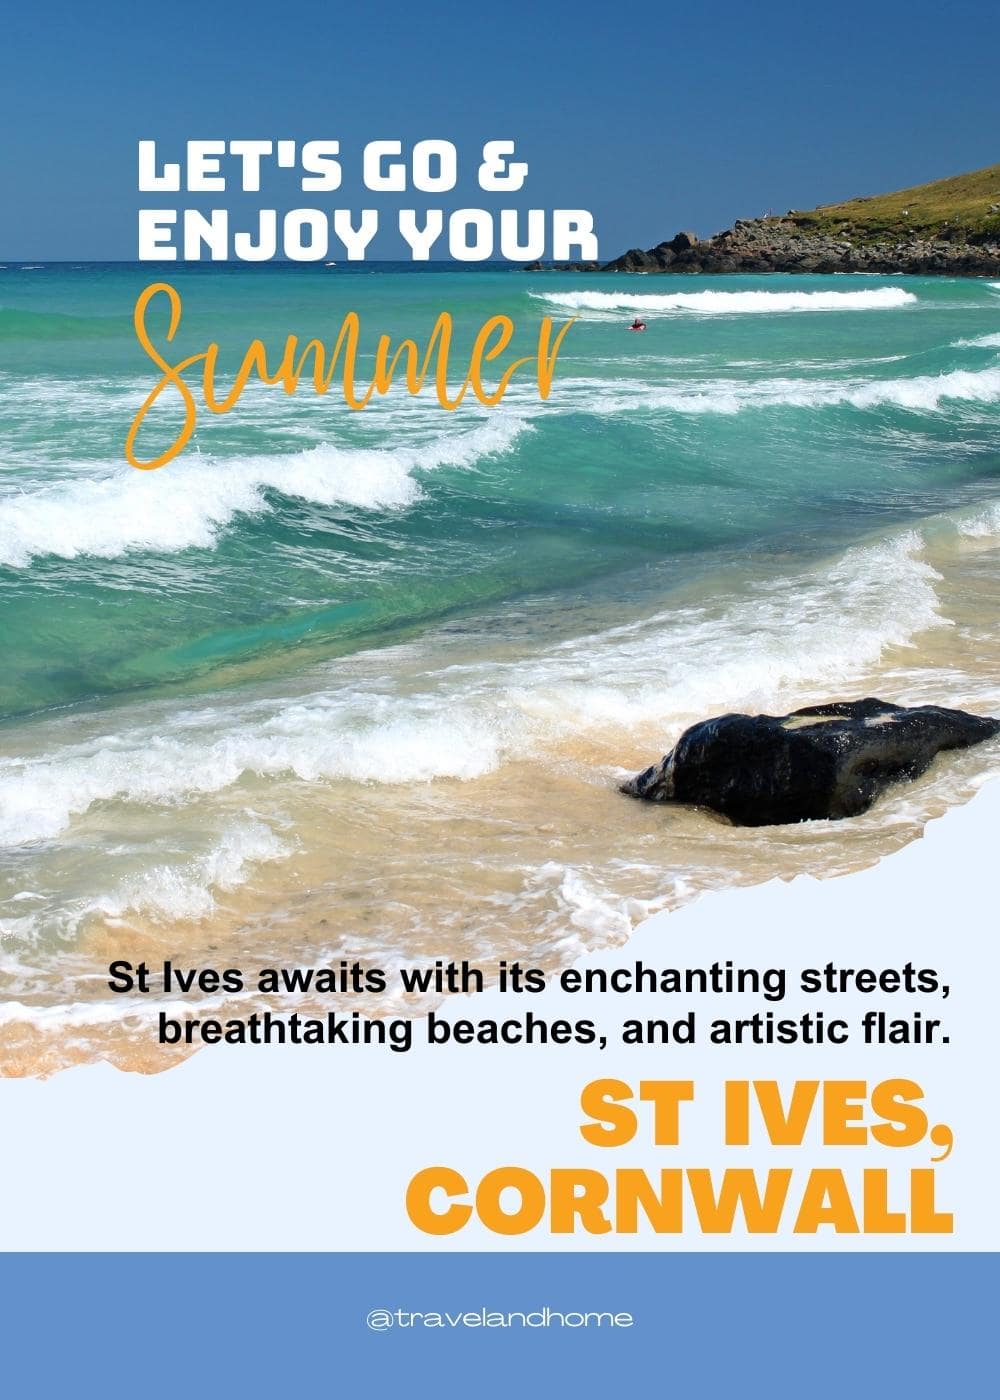 Travel Guide St Ives Cornwall, UK, where to stay, what to do, all inclusive complete travel guide min